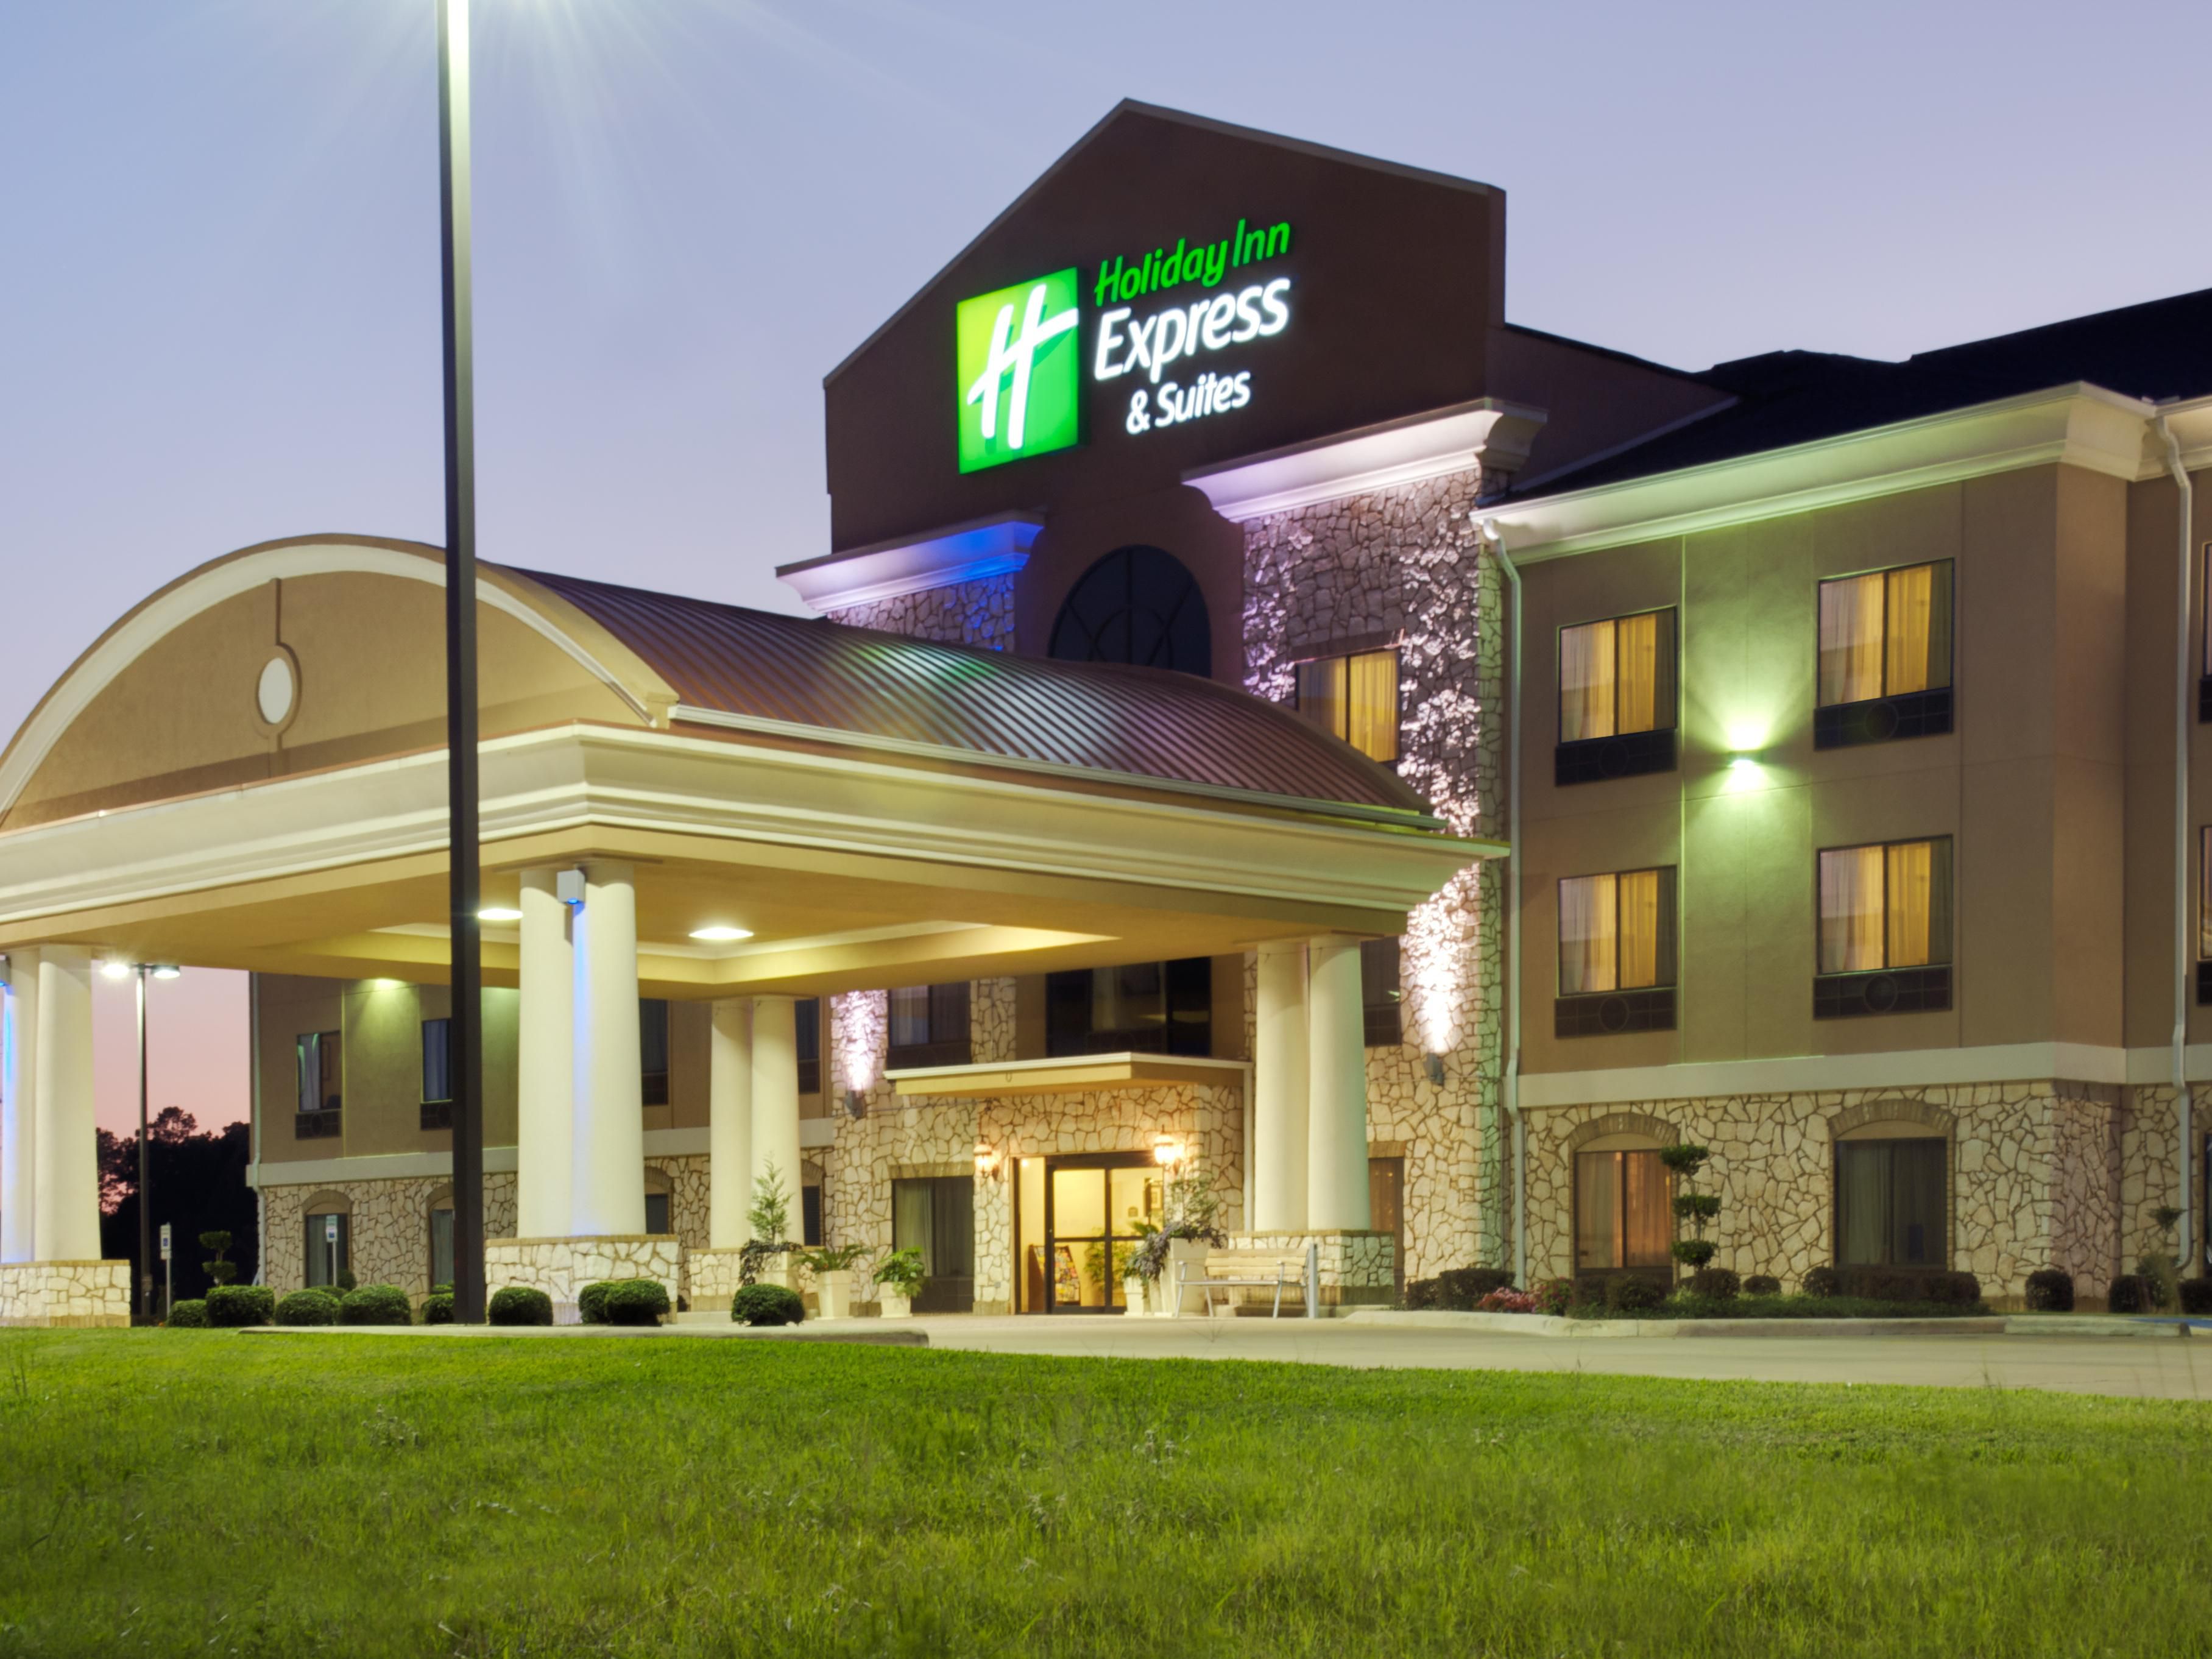 Holiday Inn Express And Suites Center 2533108347 4x3